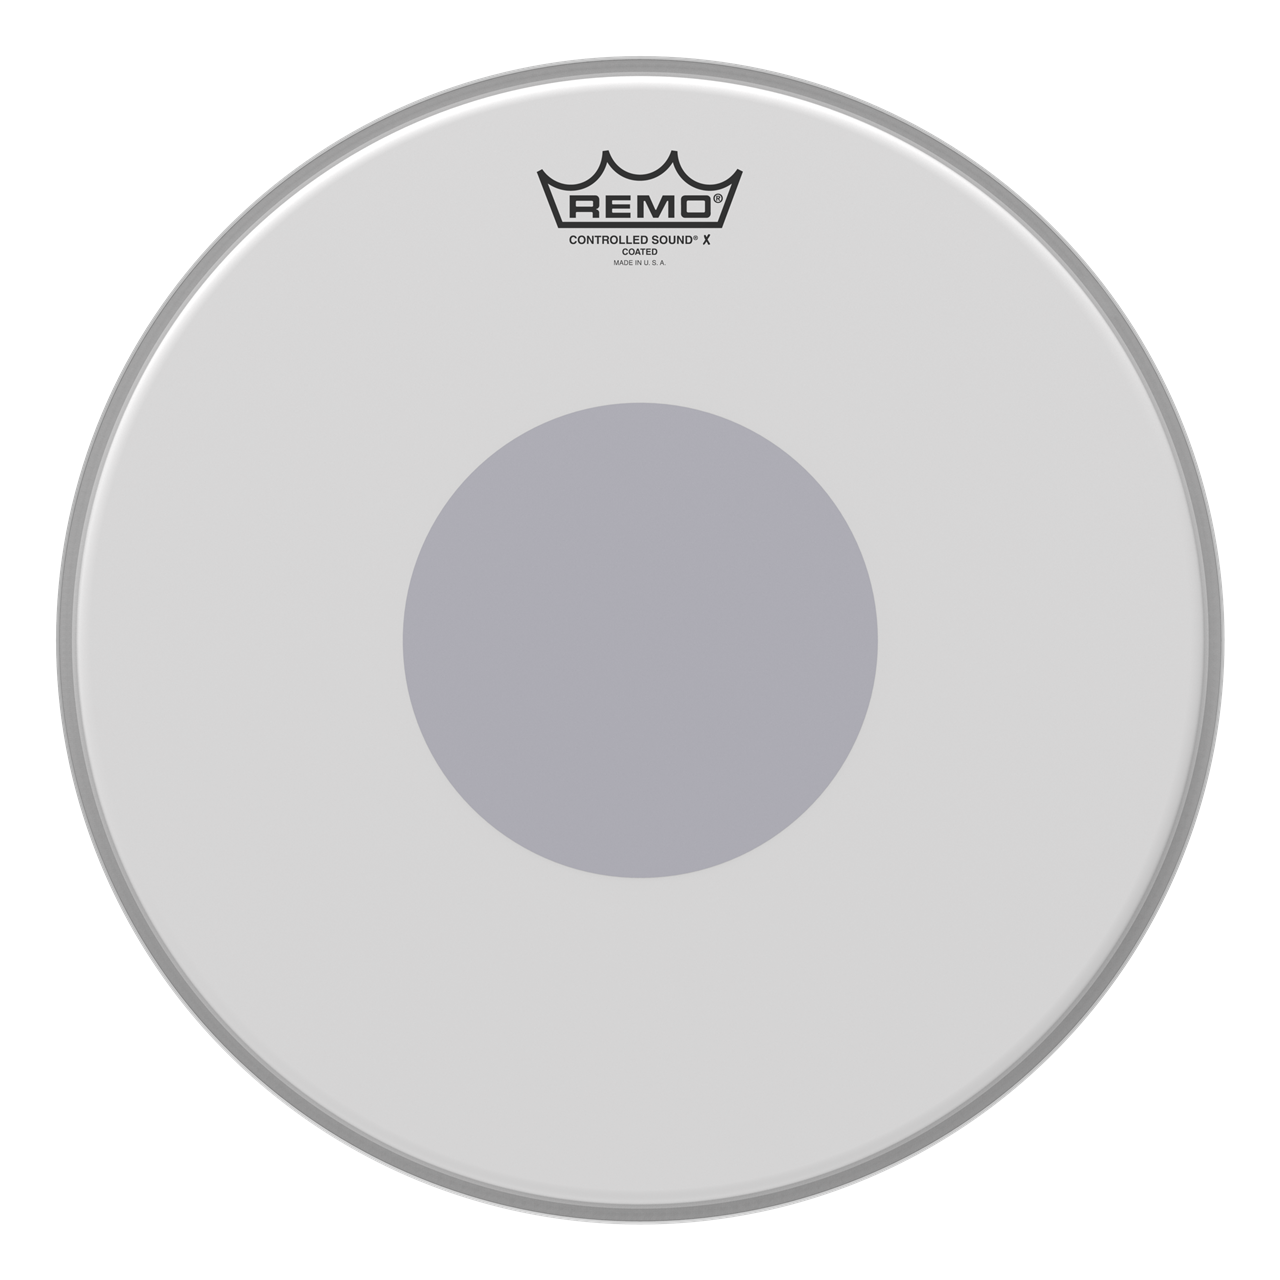 Remo CX-0112-10 Controlled Sound X, 12" Coated, Black Dot